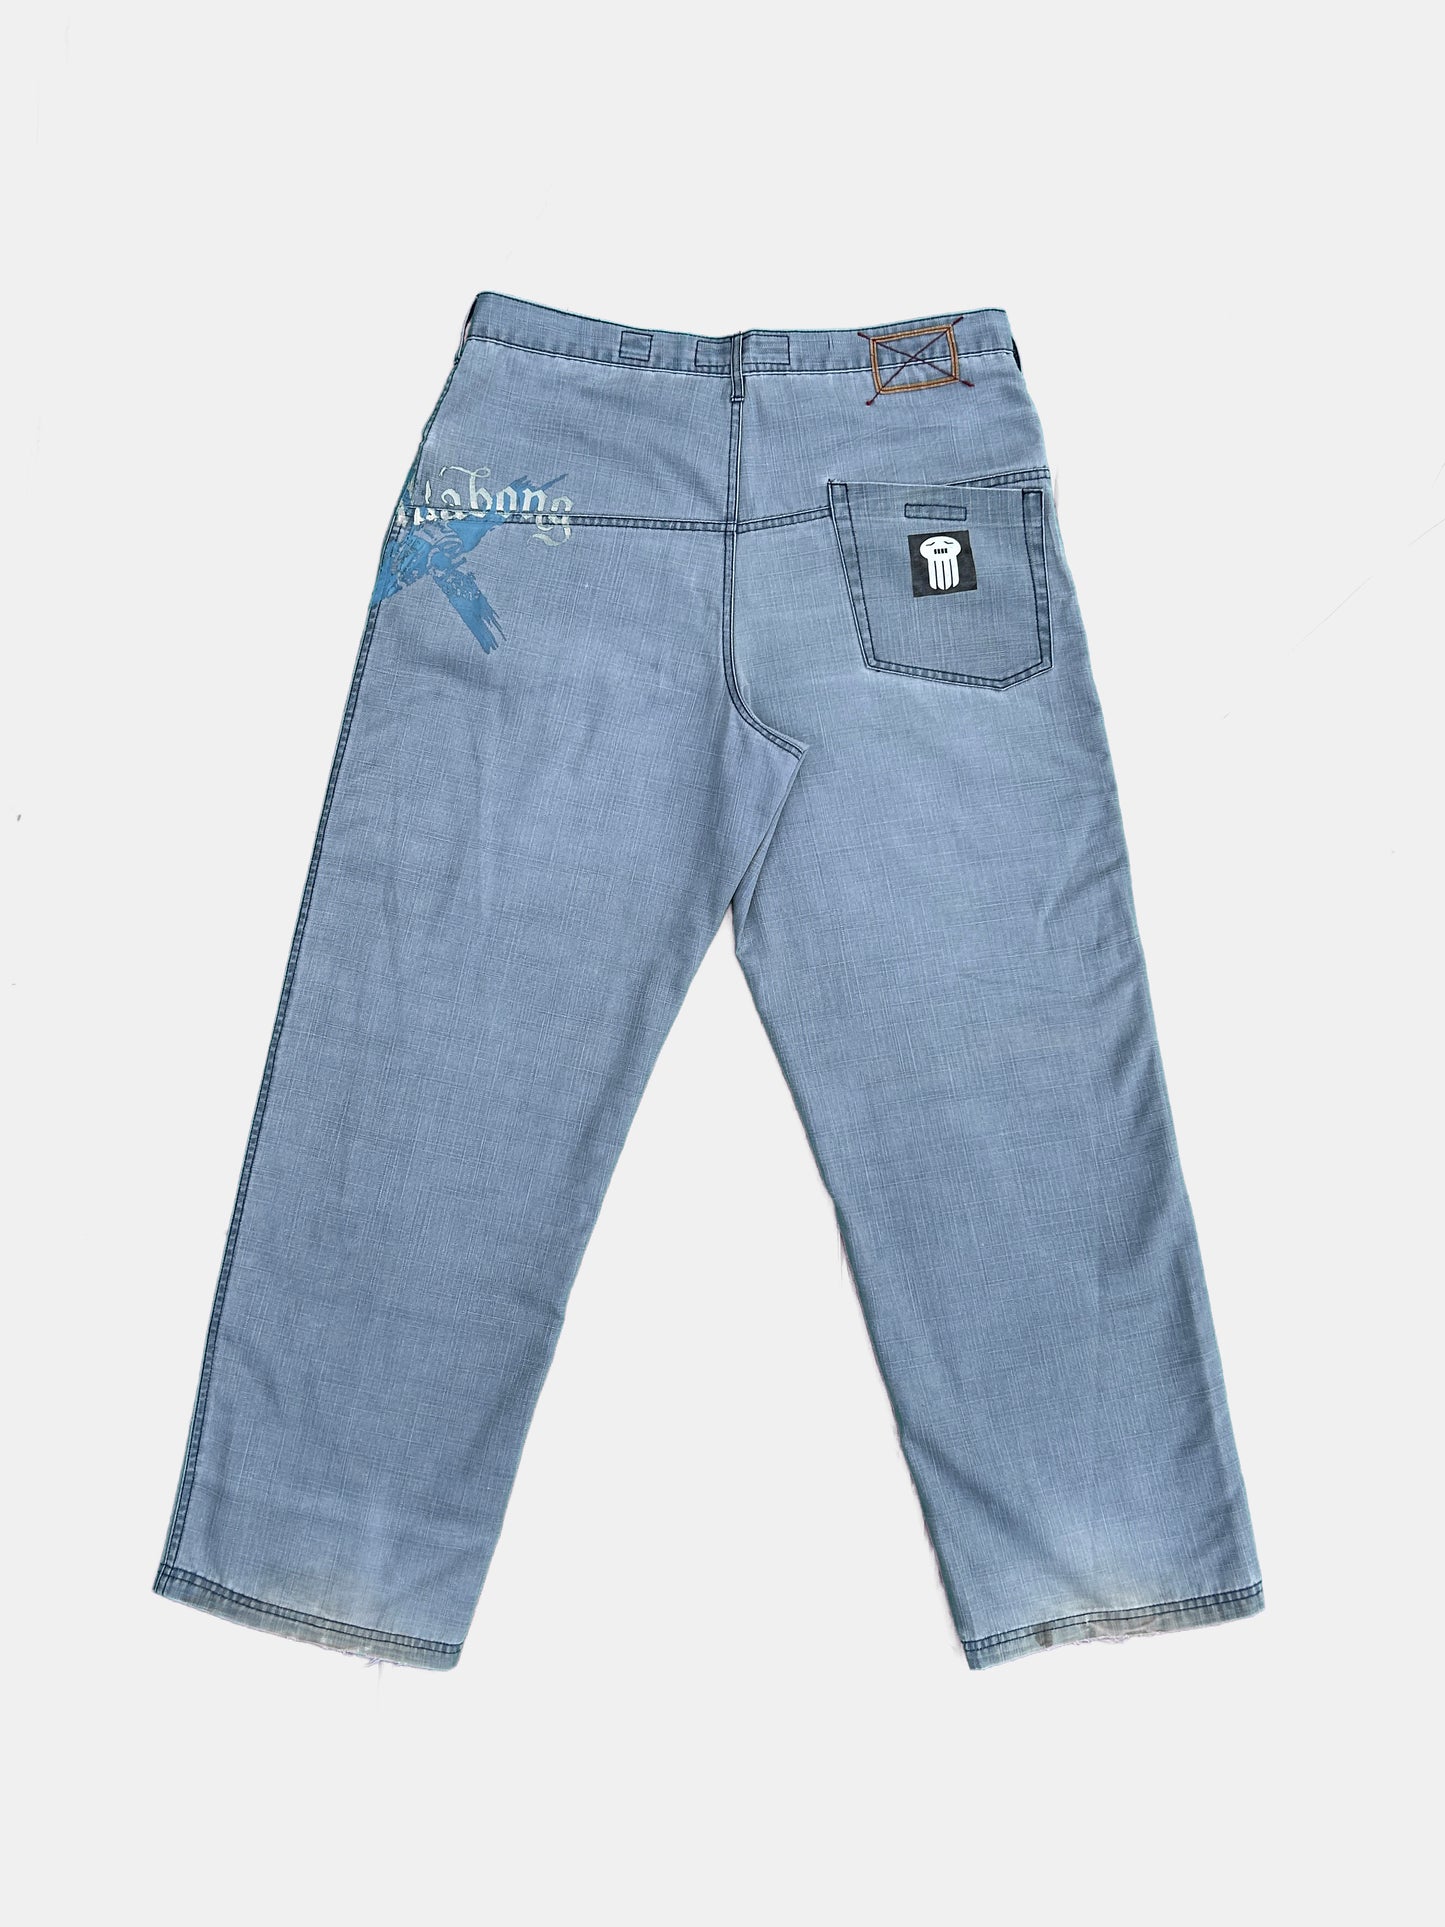 [billabong] embroidered and printed grey jeans